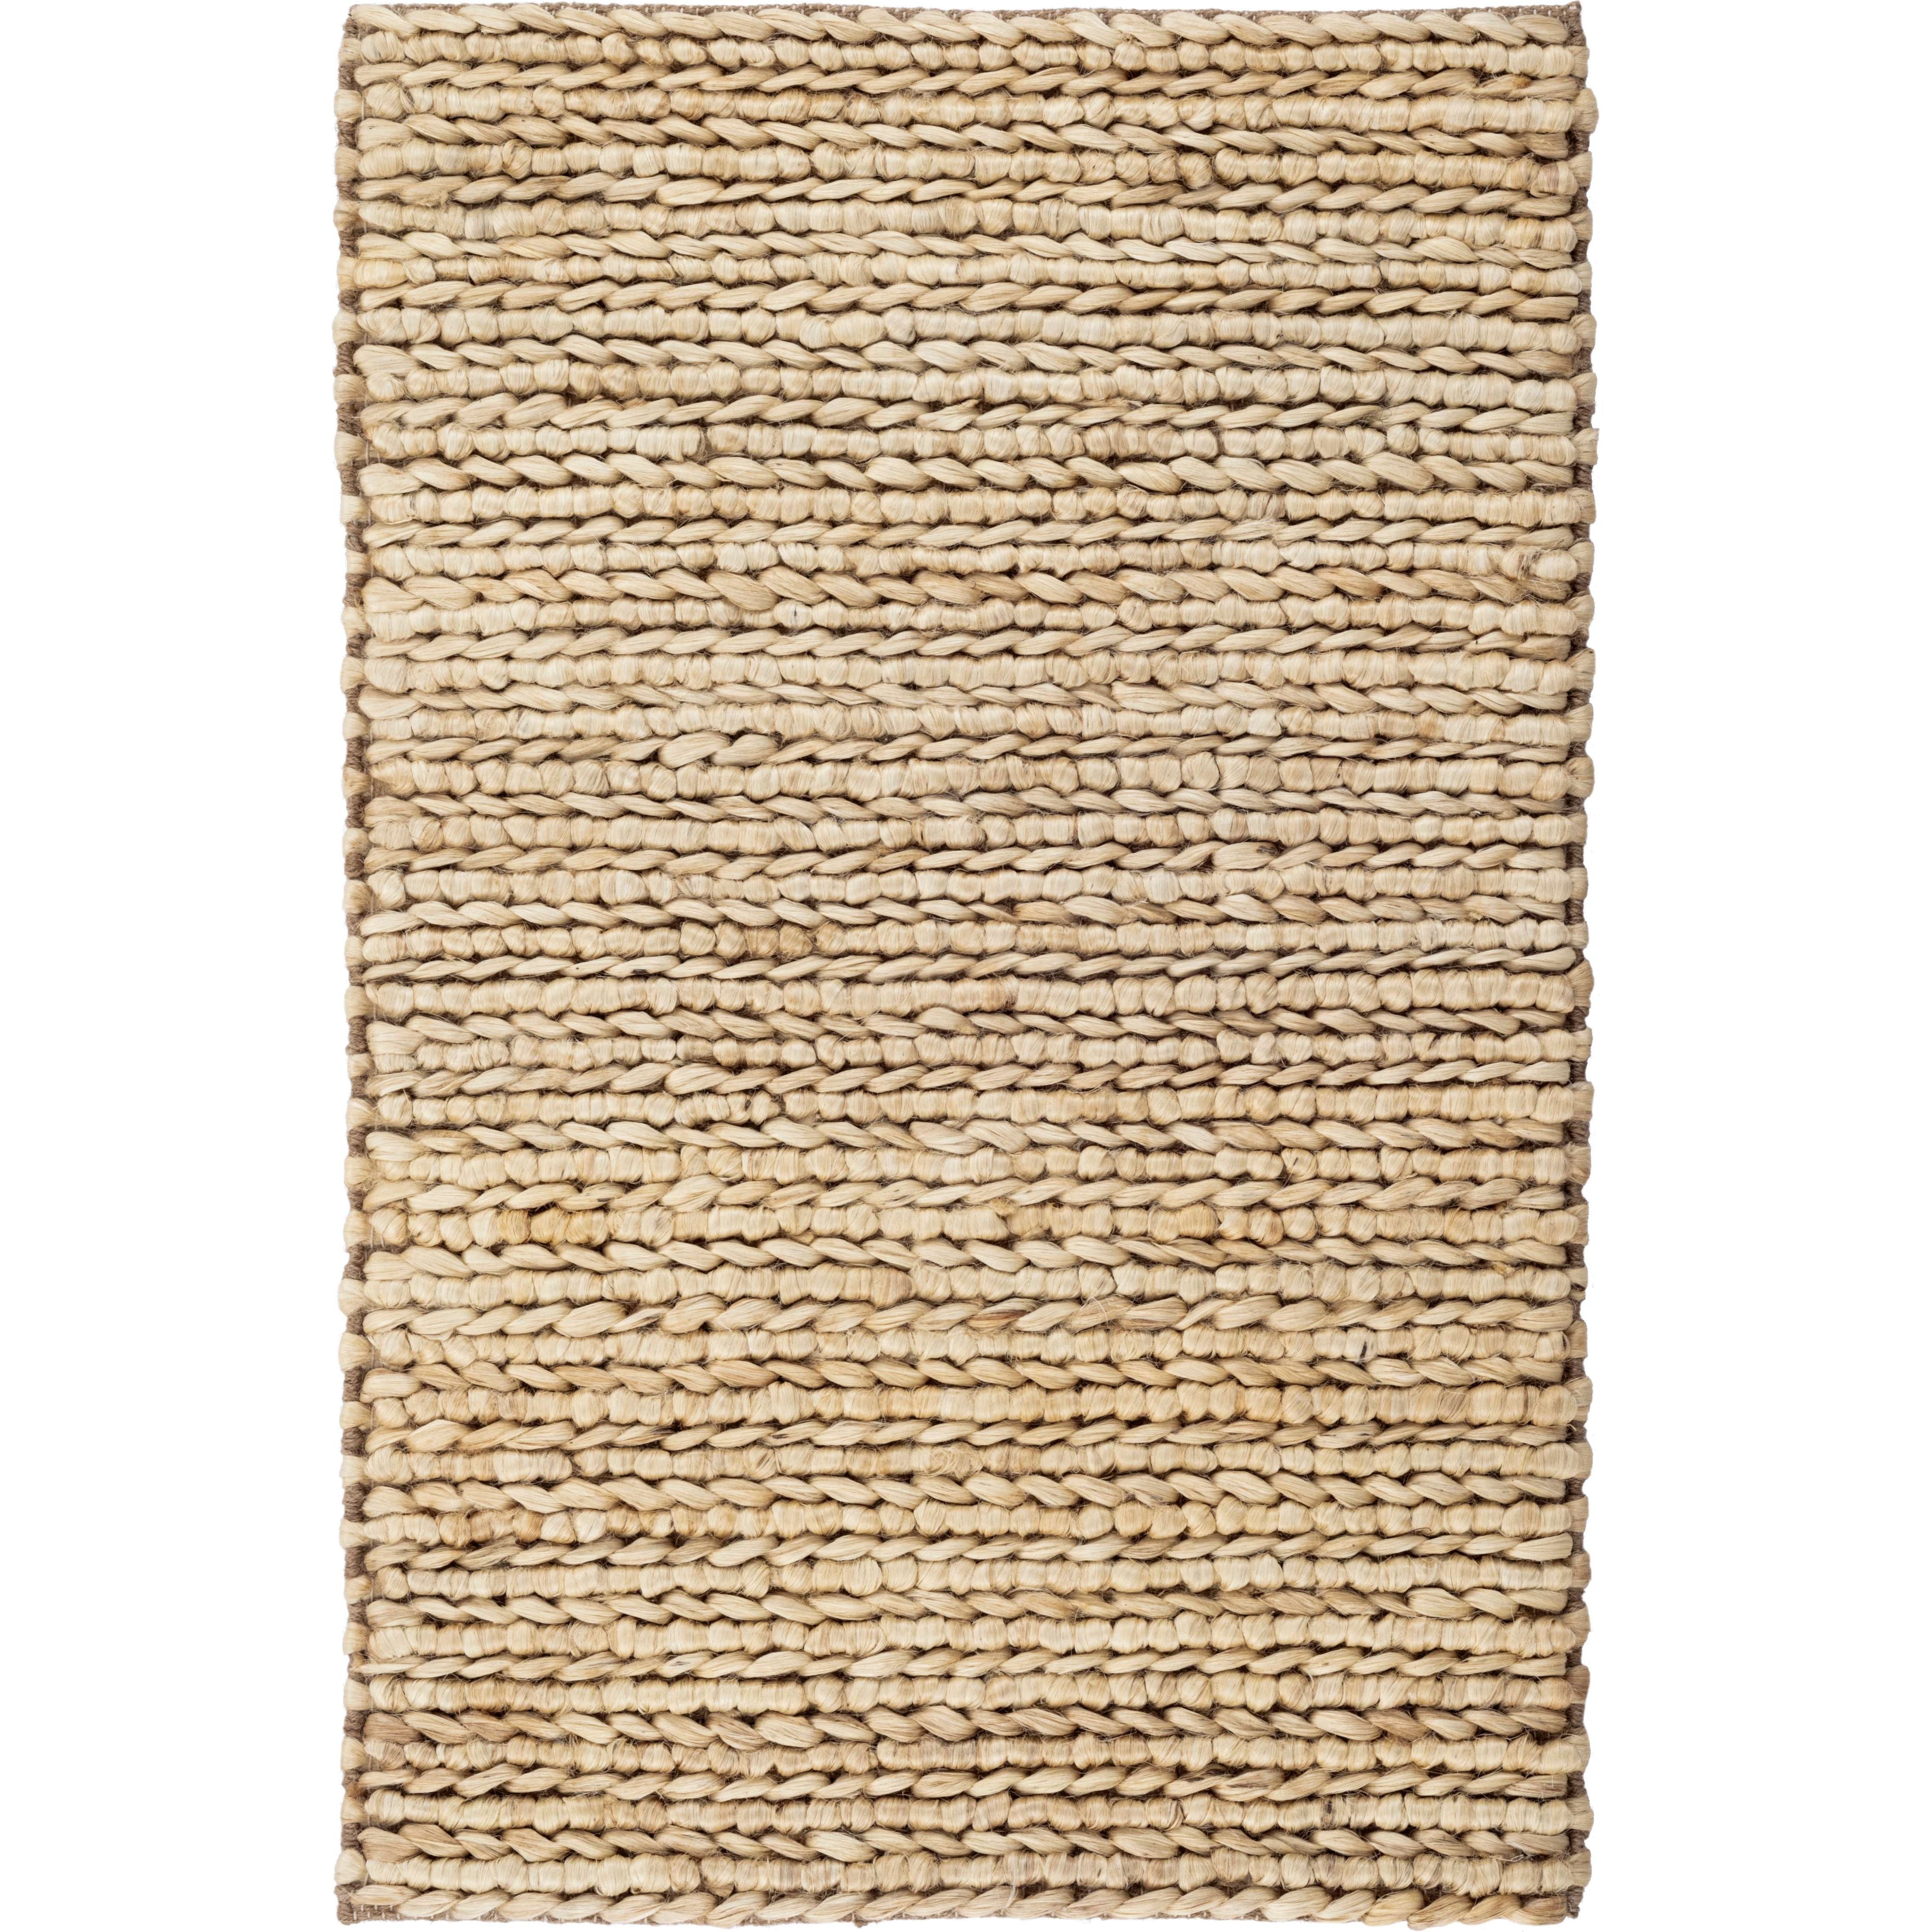 It doesn't get any easier than this all-natural jute stunner, with a unique hand-braided weave in a sun-bleached natural hue. Add the Annie Selke Dash & Albert Jute Natural handwoven rug to any space for a dose of organic chic. Amethyst Home provides interior design, new home construction design consulting, vintage area rugs, and lighting in the Kansas City metro area.